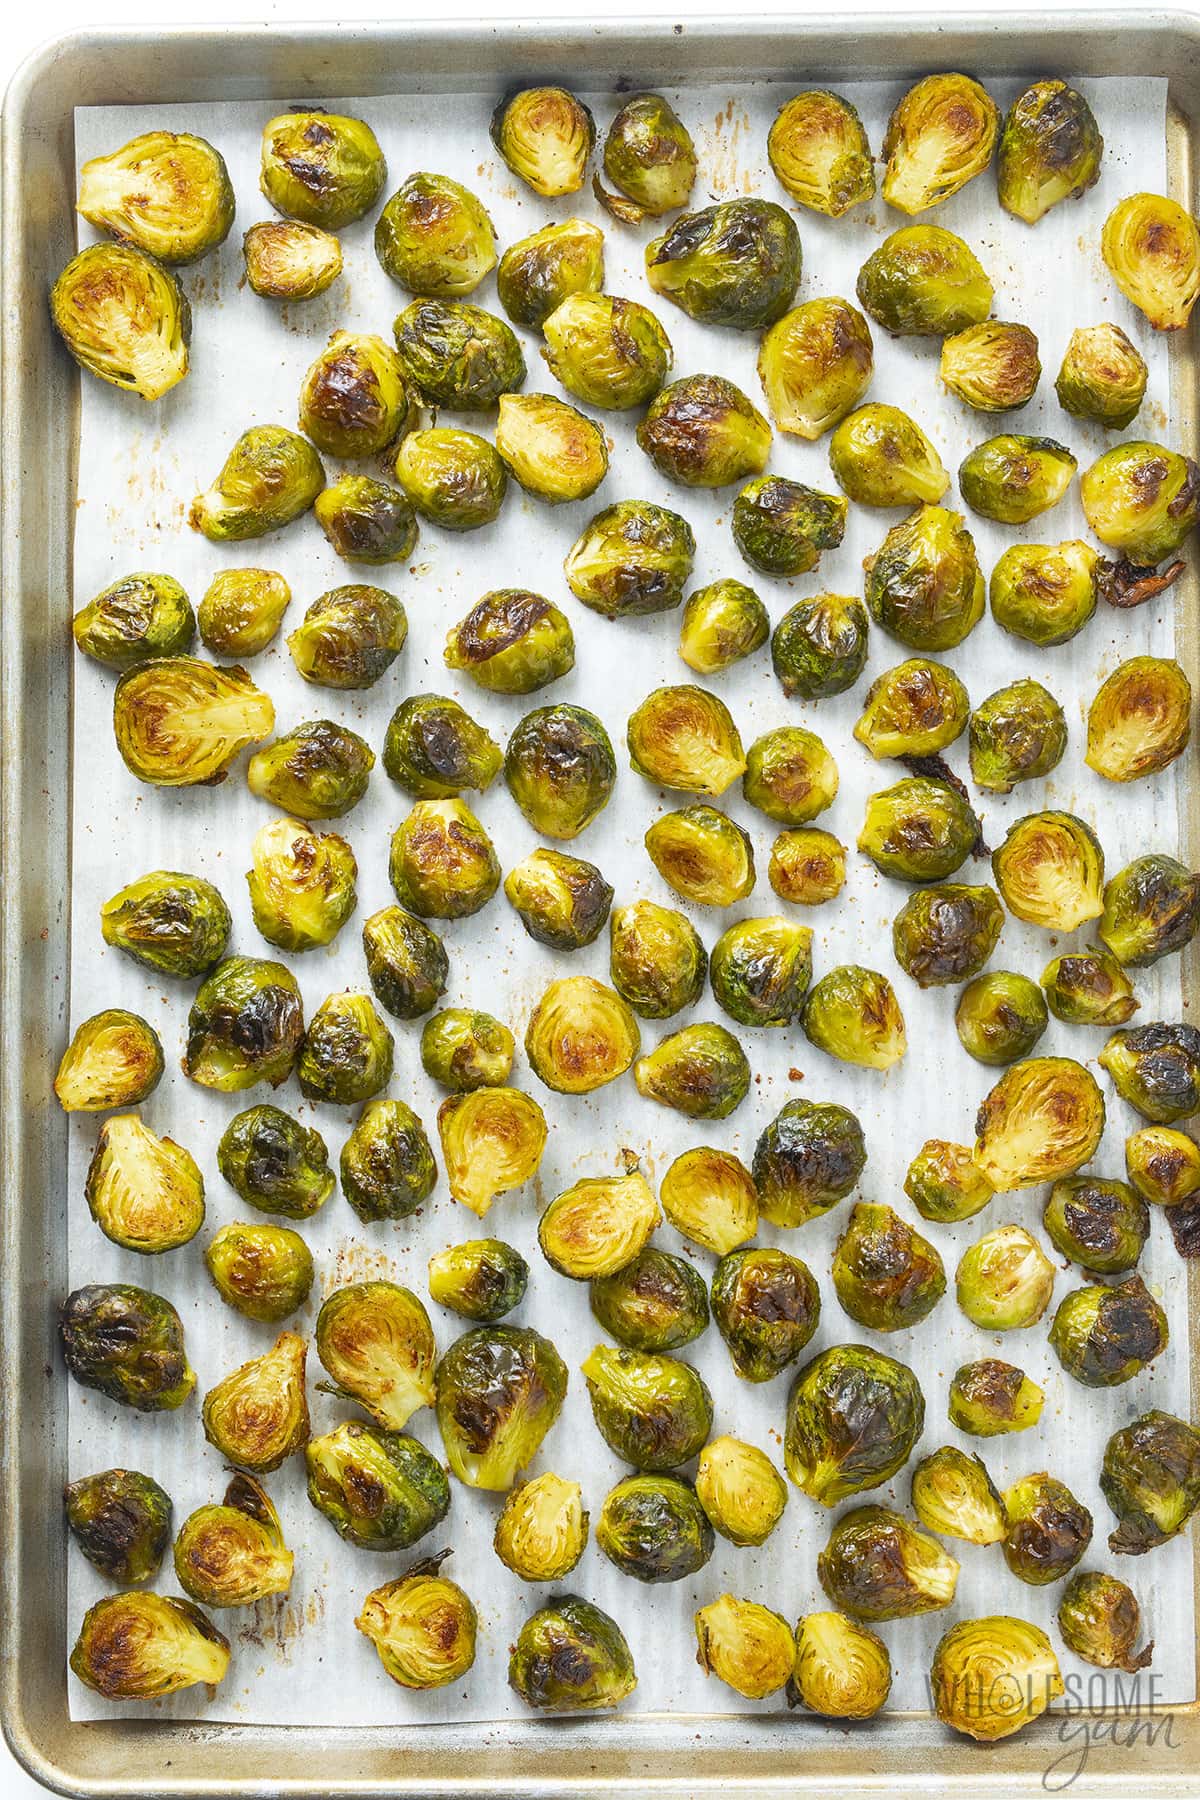 Roast Brussels sprouts in the oven on a baking sheet.